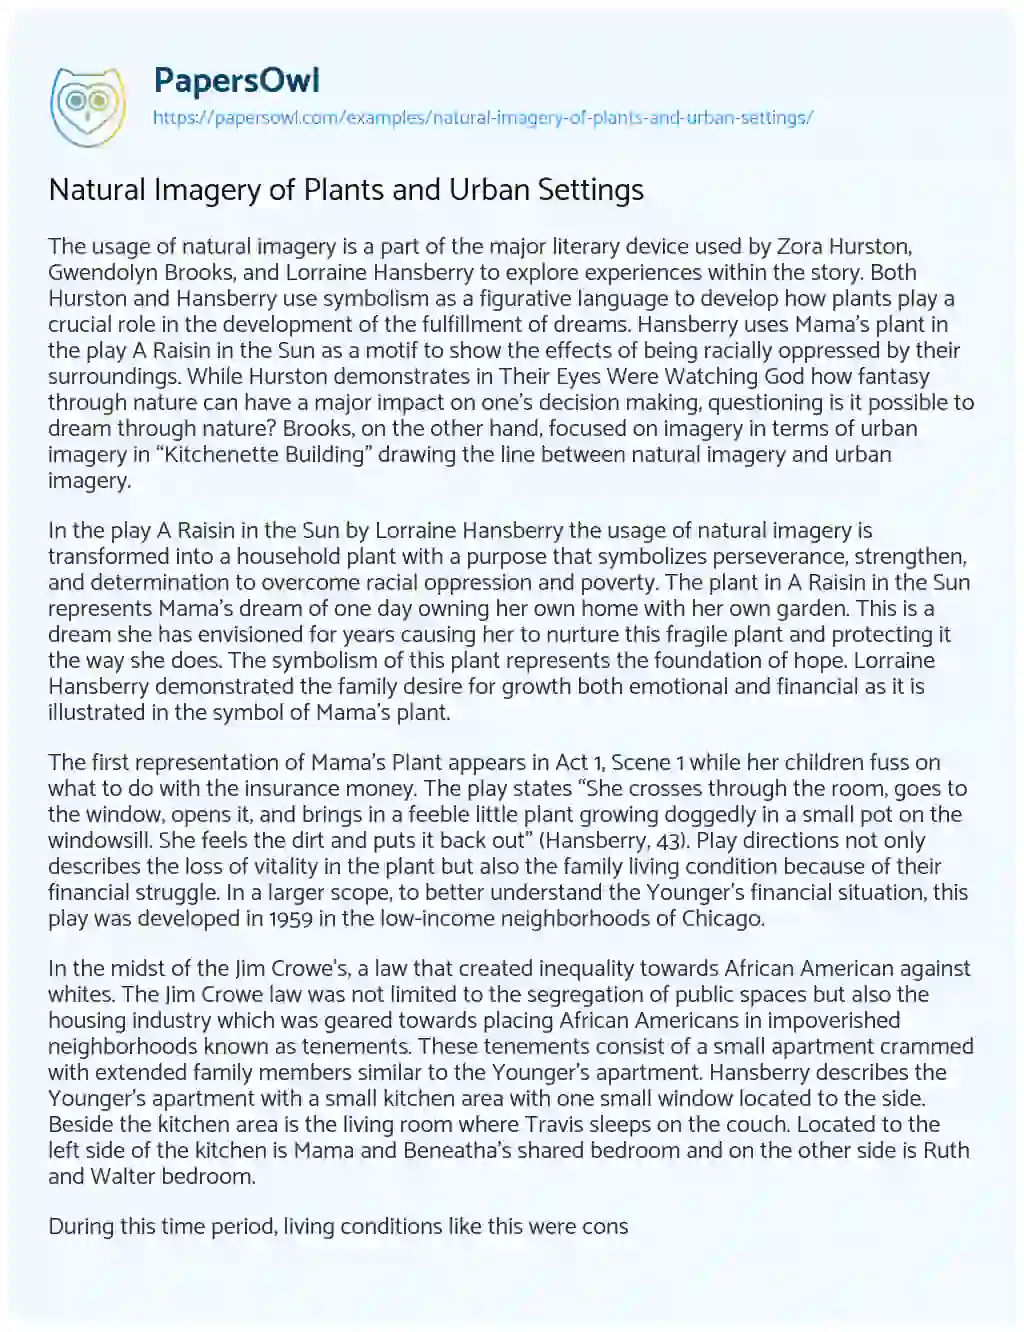 Essay on Natural Imagery of Plants and Urban Settings